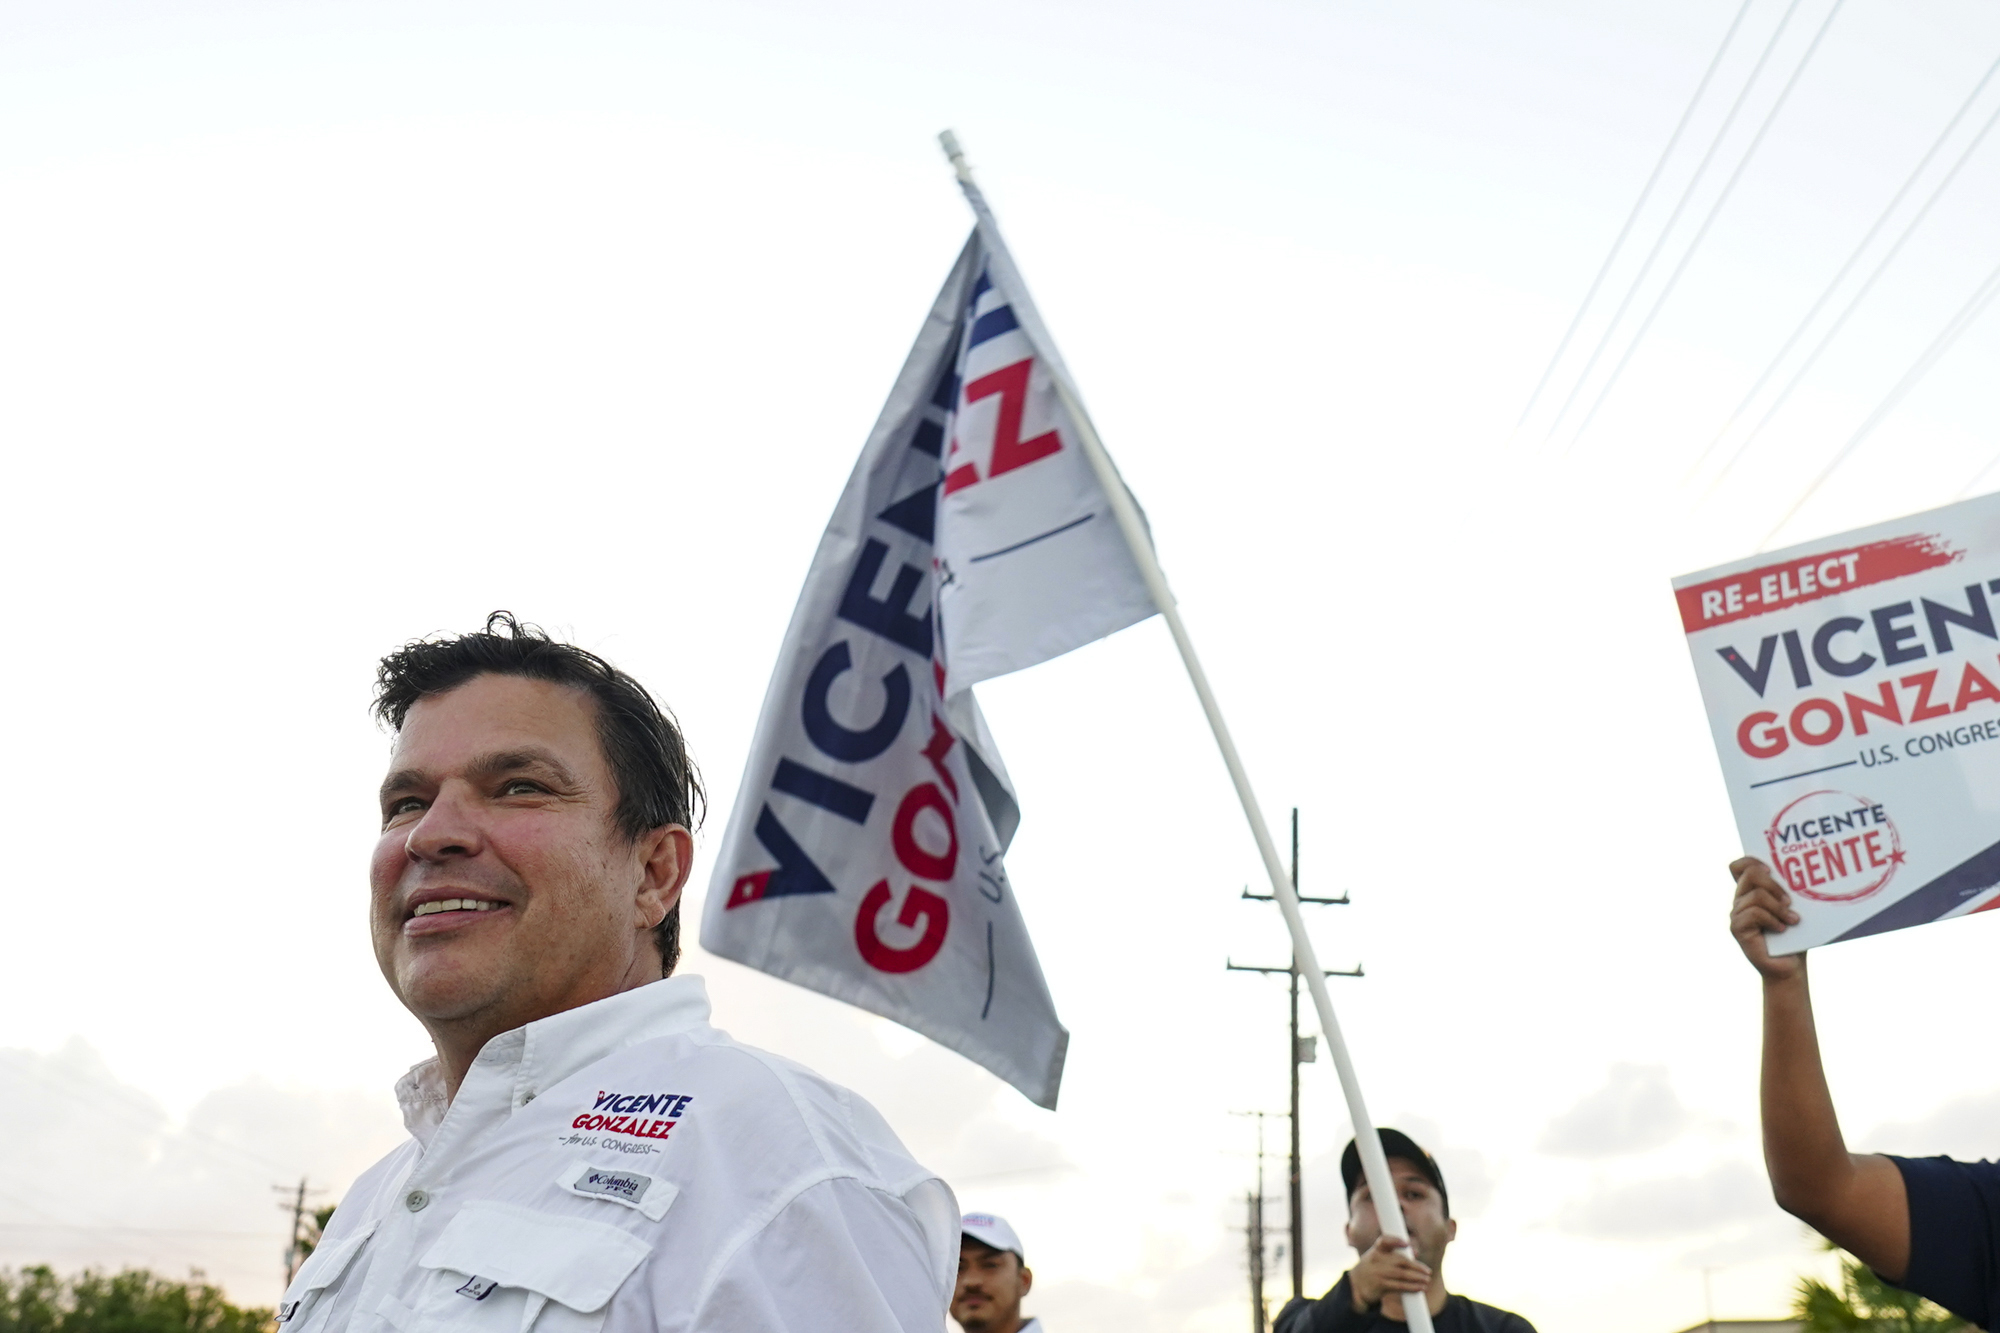 Vicente Gonzalez, a Latino man with short brown hair, smiles while wearing a campaign-branded button down shirt, a Gonzalez flag and sign held aloft behind him.